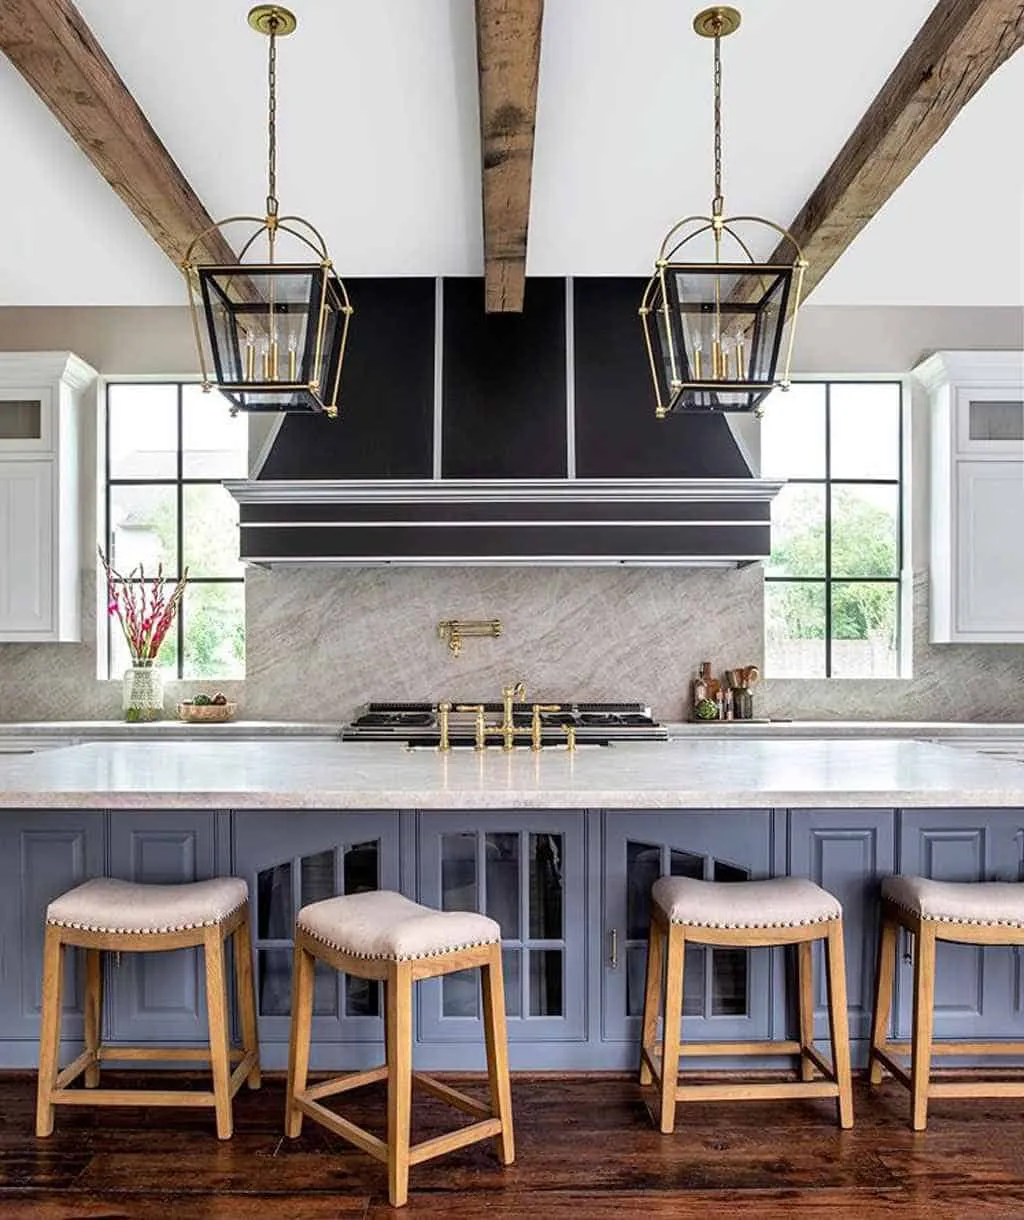 metallic light fixtures in a kitchen with wooden seats and white counters